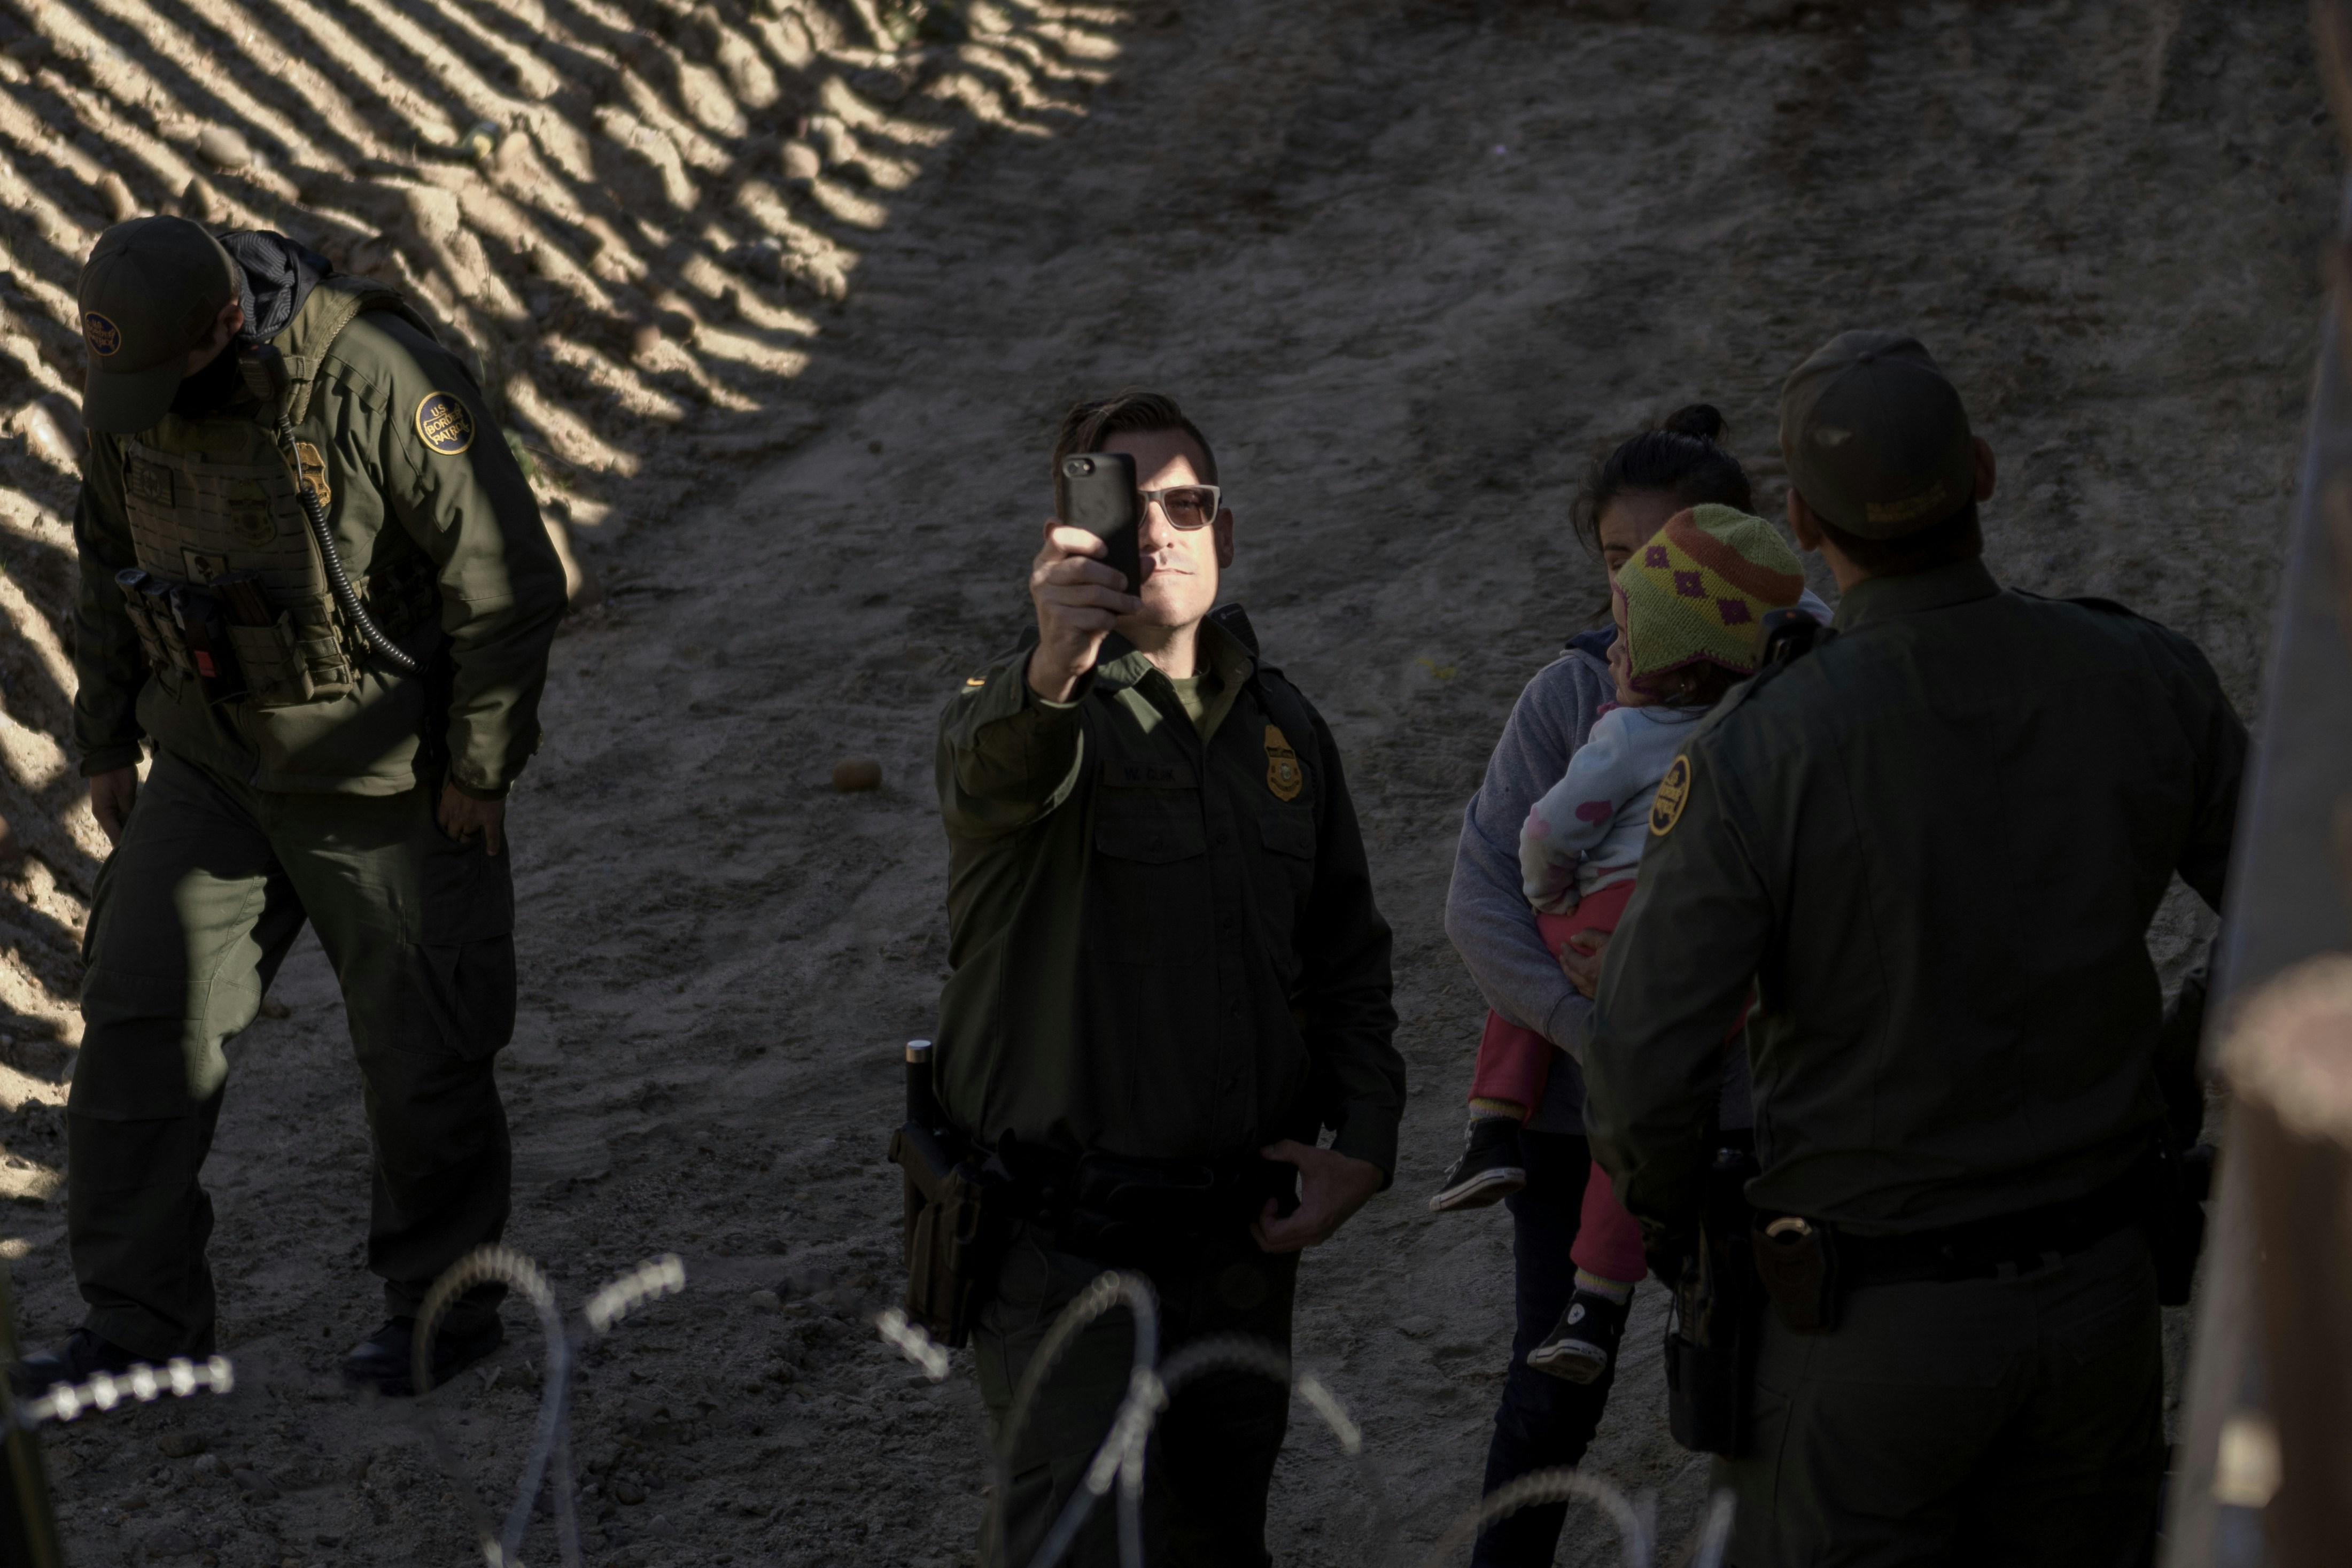 A Border Patrol officers uses his cell phone to take snapshots of the journalists after a Mexican migrant with her daughter jumped the border fence to get into the U.S. side to San Diego, Calif., from Tijuana, Mexico, Saturday, Dec. 29, 2018. Discouraged by the long wait to apply for asylum through official ports of entry, many migrants from recent caravans are choosing to cross the U.S. border wall and hand themselves in to border patrol agents. (AP Photo/Daniel Ochoa de Olza)